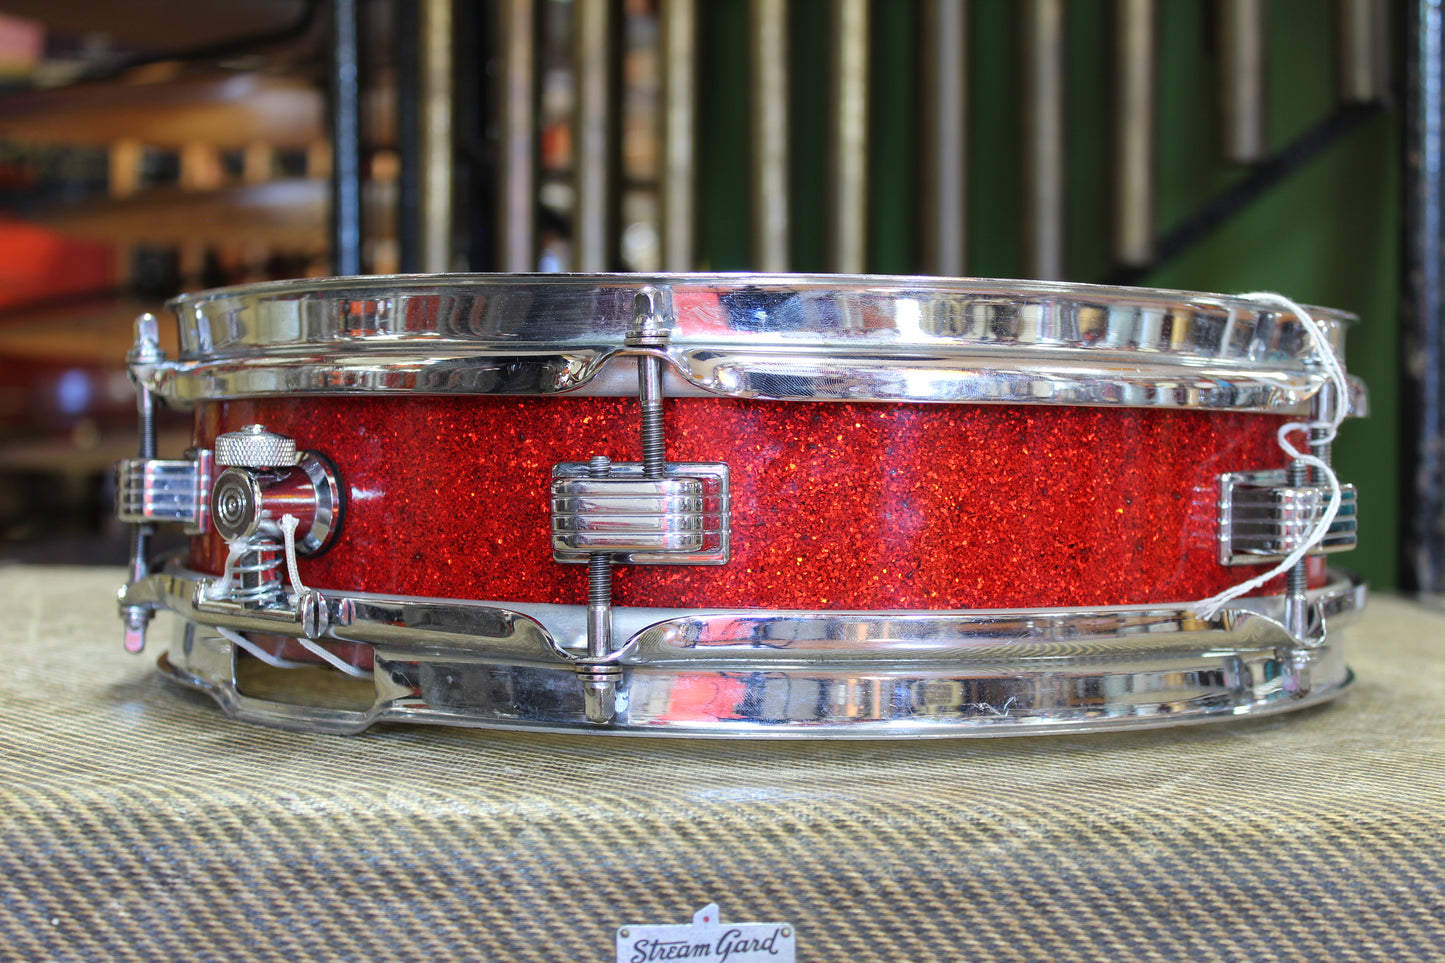 1950s WFL 3"x13" Buddy Rich "Be-Bop" Snare Drum in Red Flash